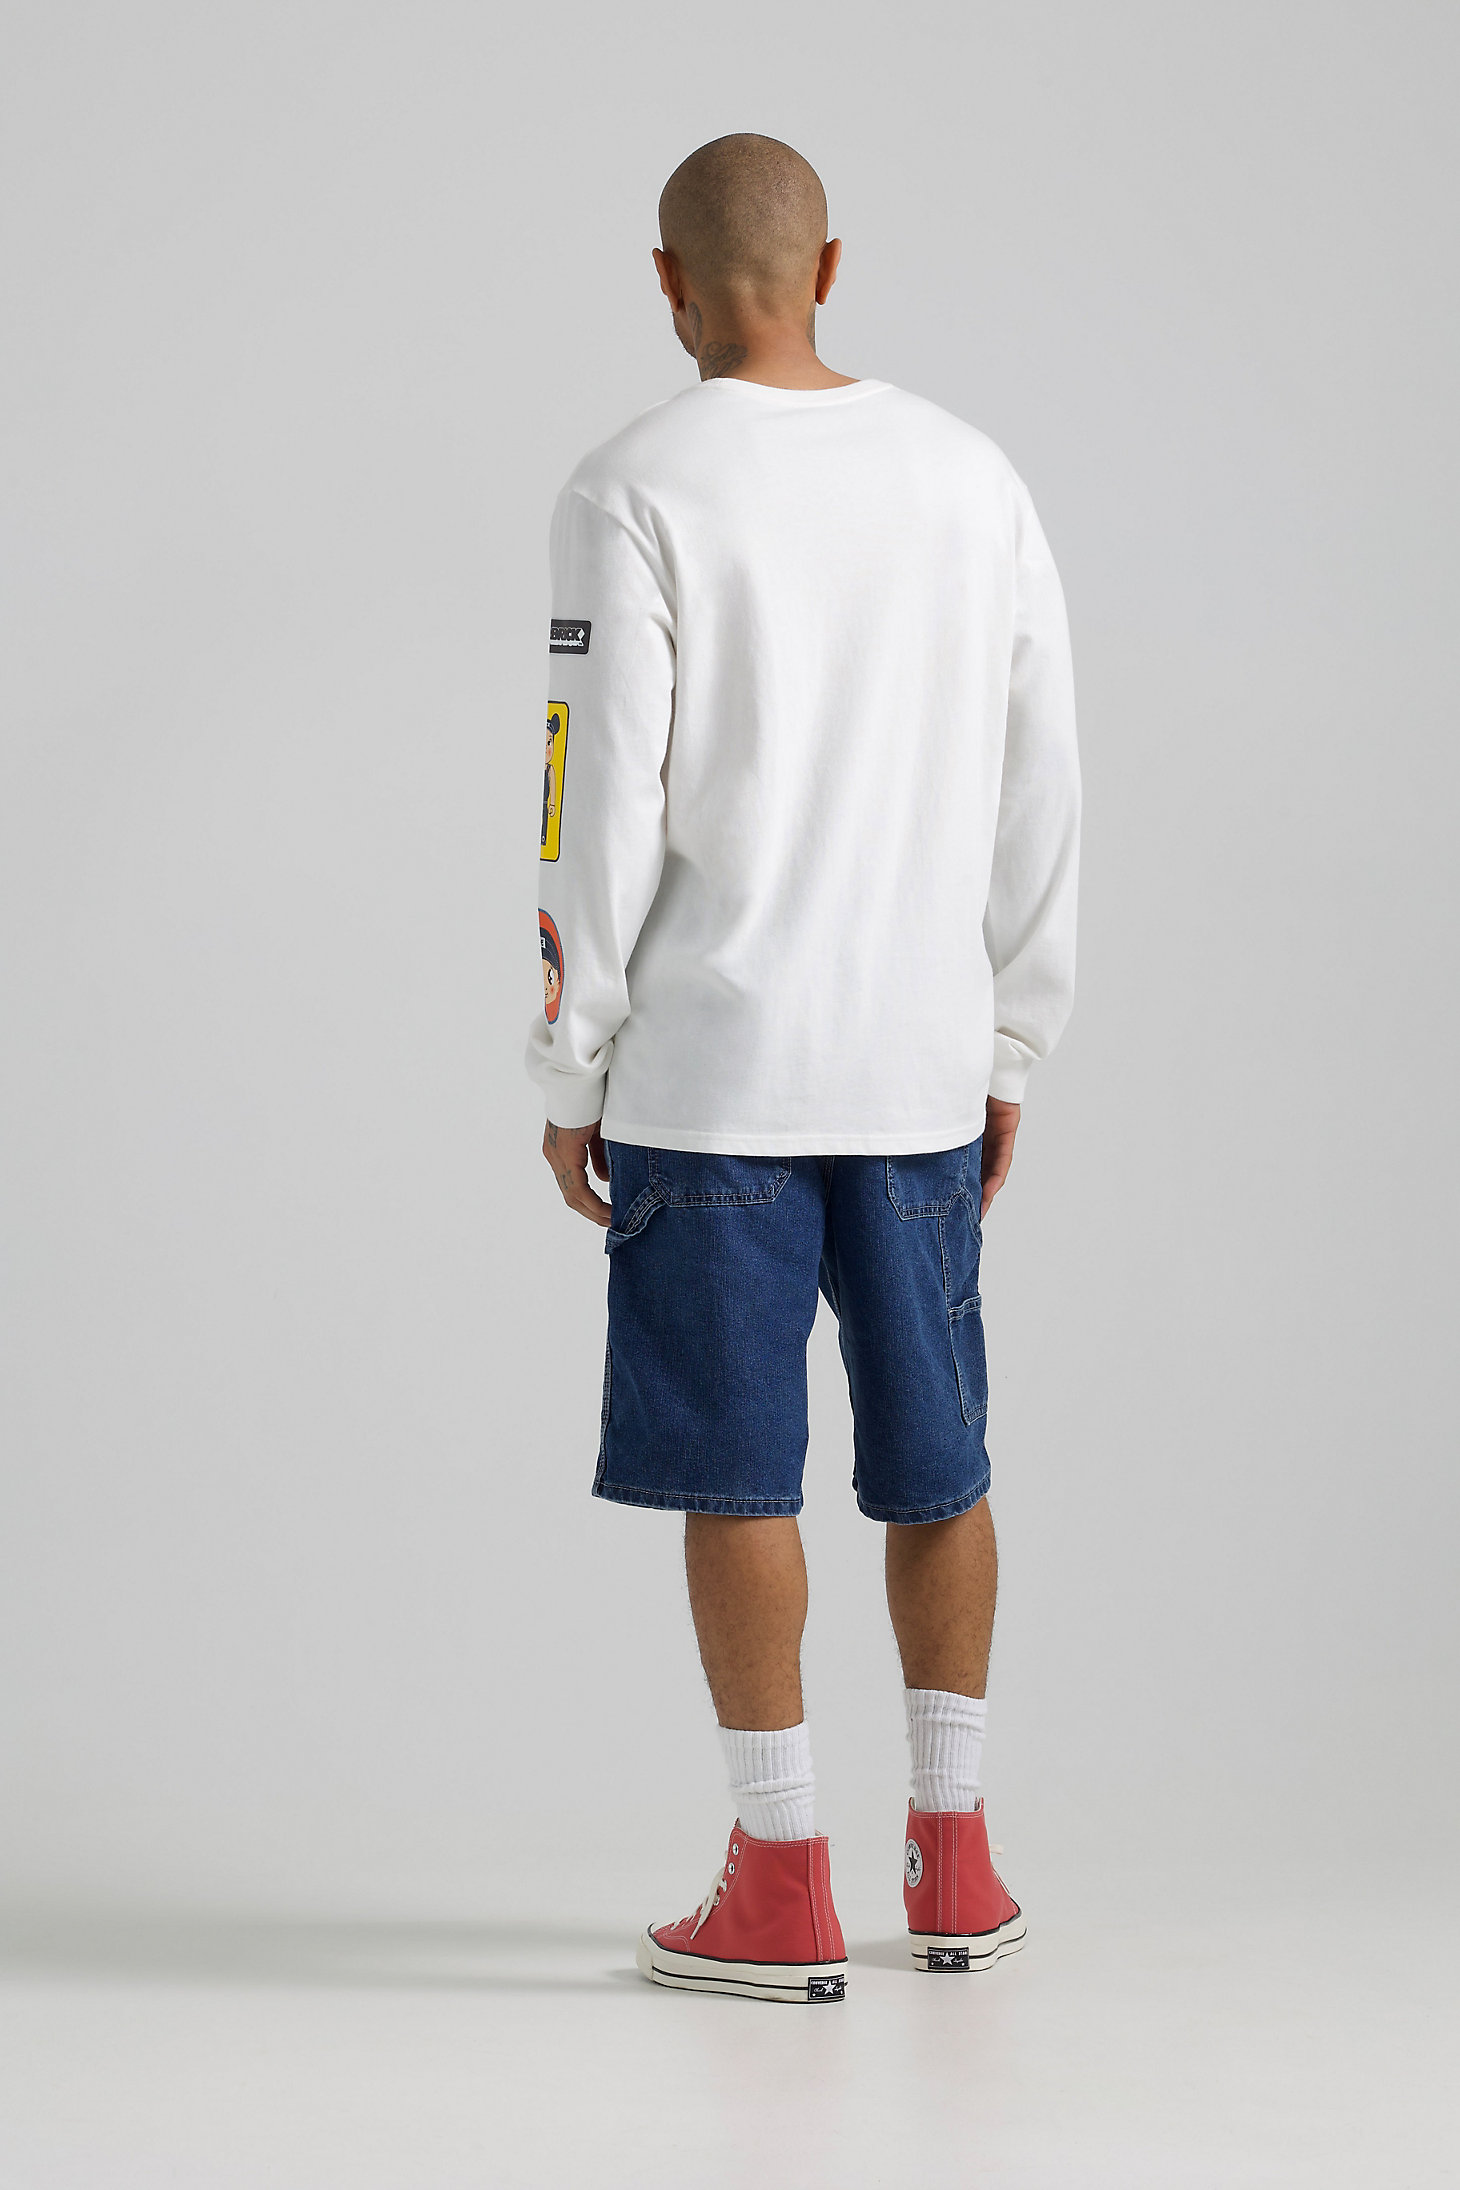 Men’s Lee x BE@RBRICK Relaxed Fit Long Sleeve Tee in Marshmallow alternative view 3